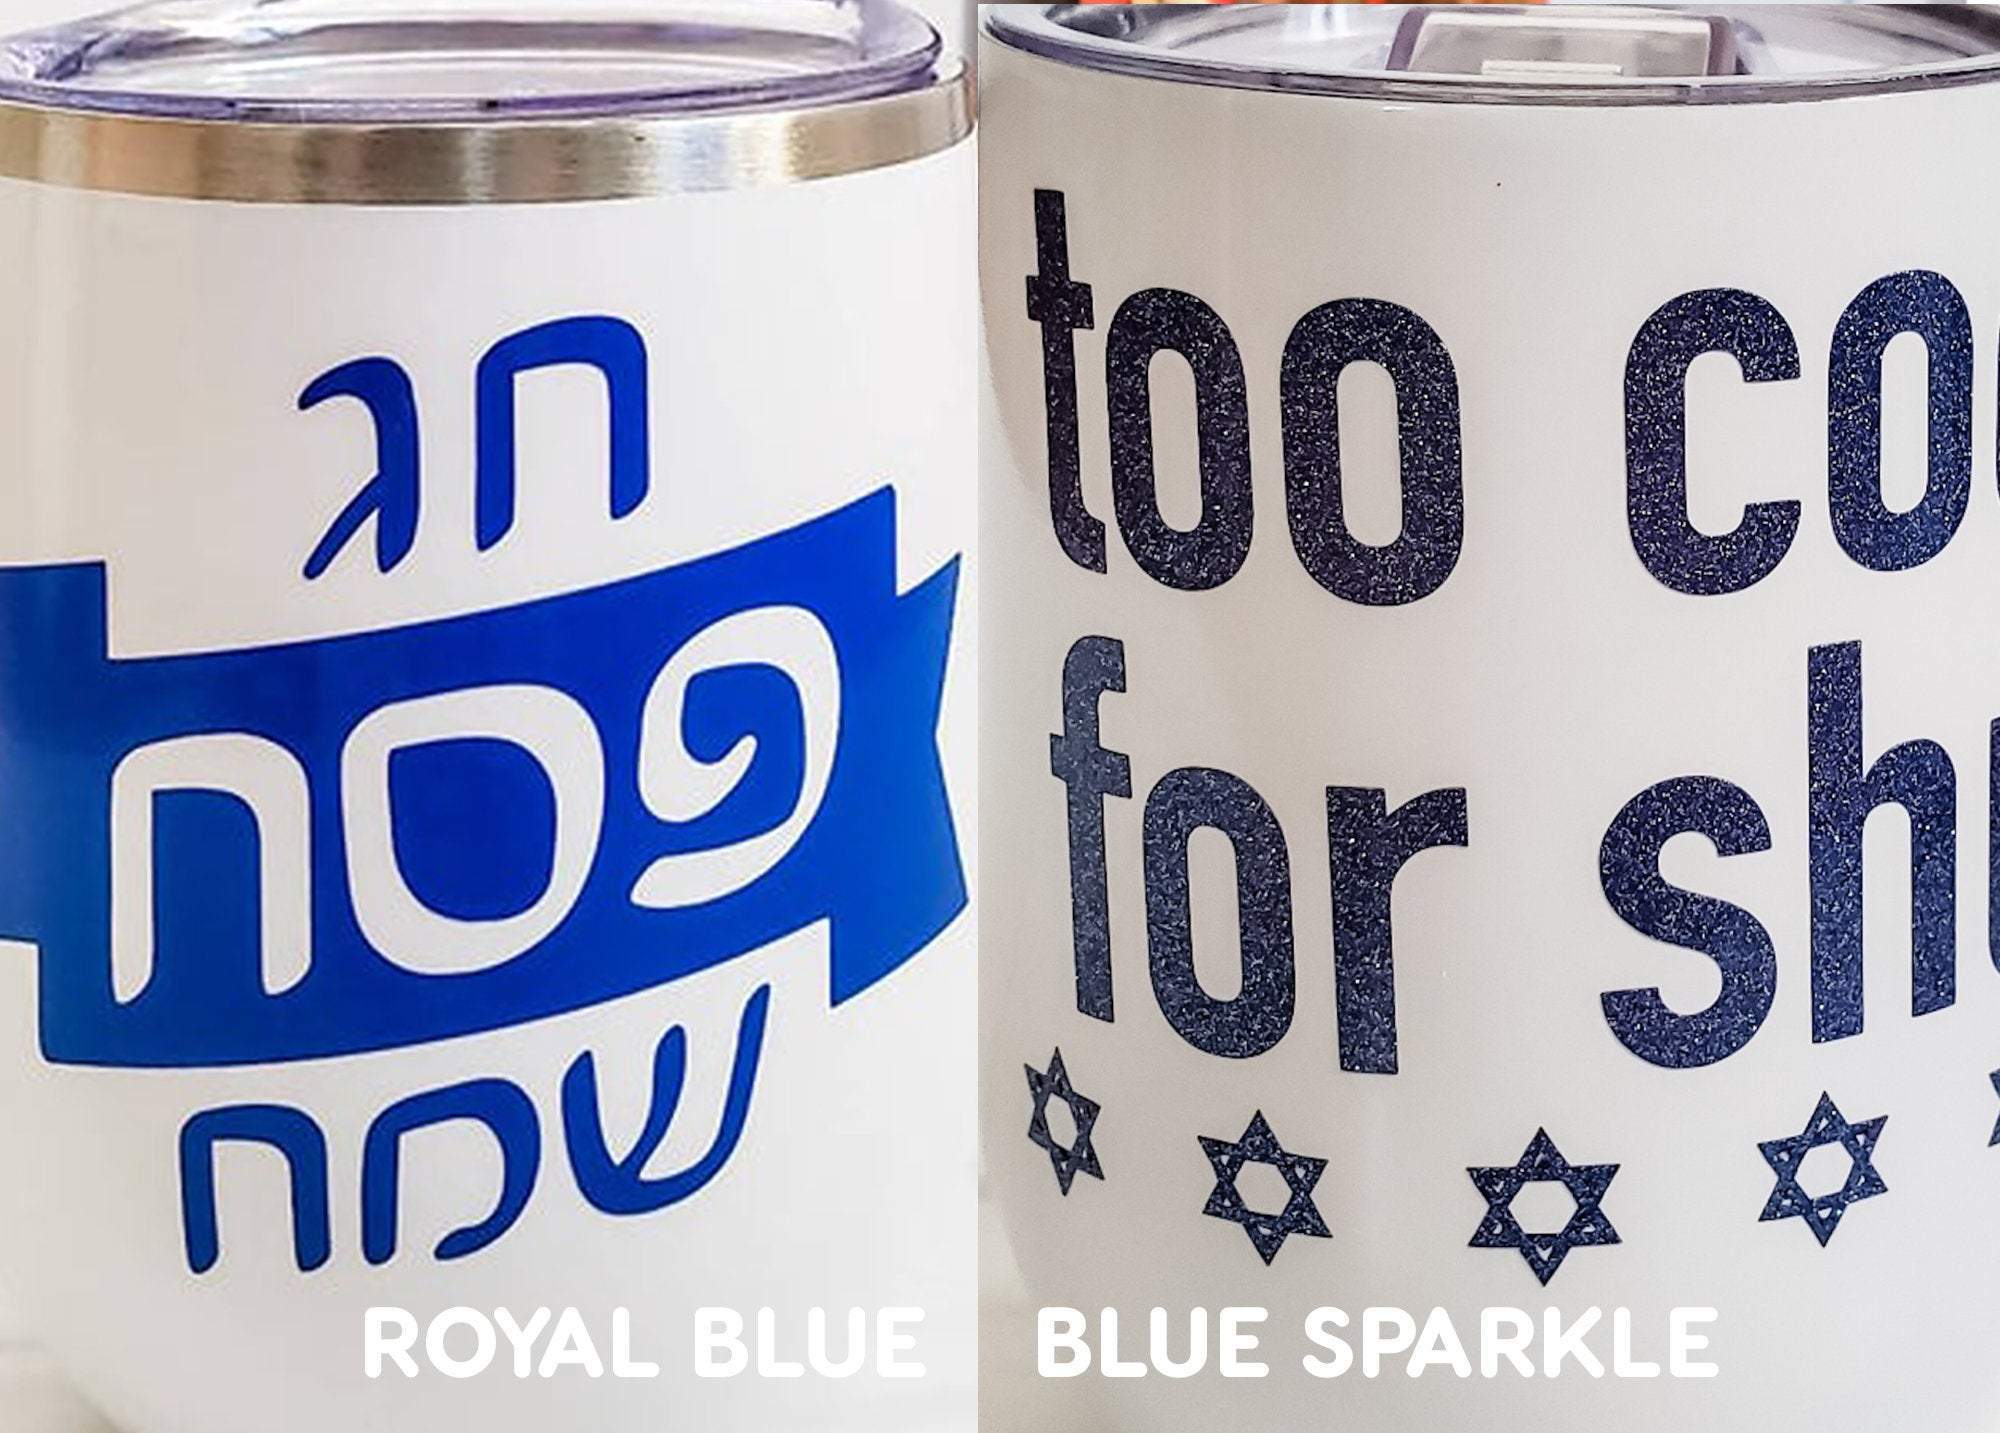 Too Cool for Shul Wine Tumbler Salt and Sparkle